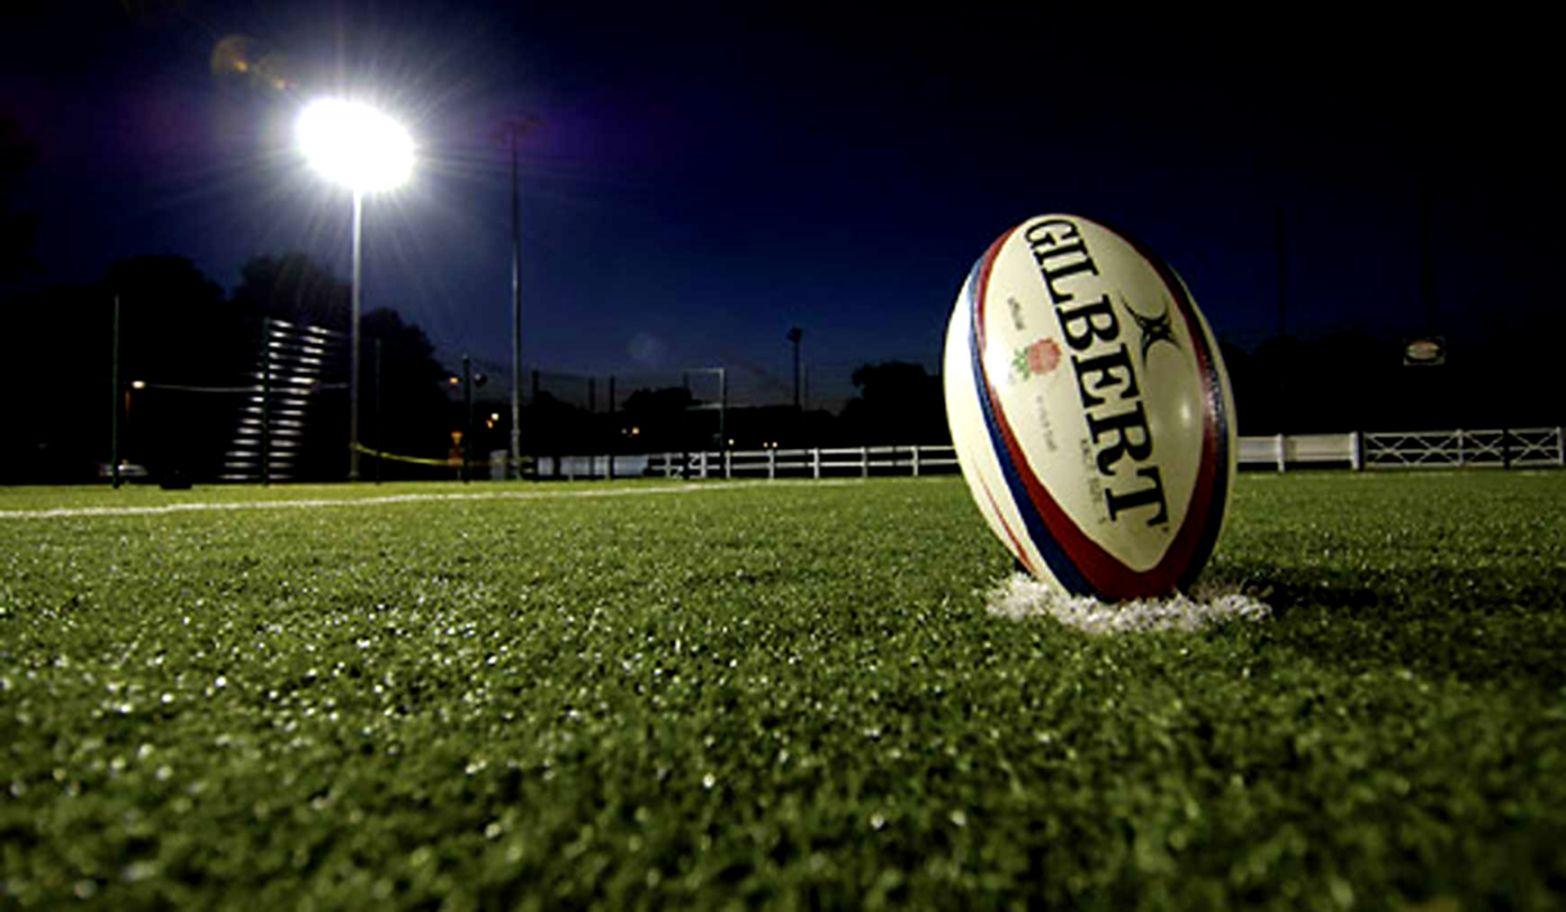 Rugby Ball Wallpaper Hd - Rugby Wallpapers - Wallpaper Cave - selectclouds